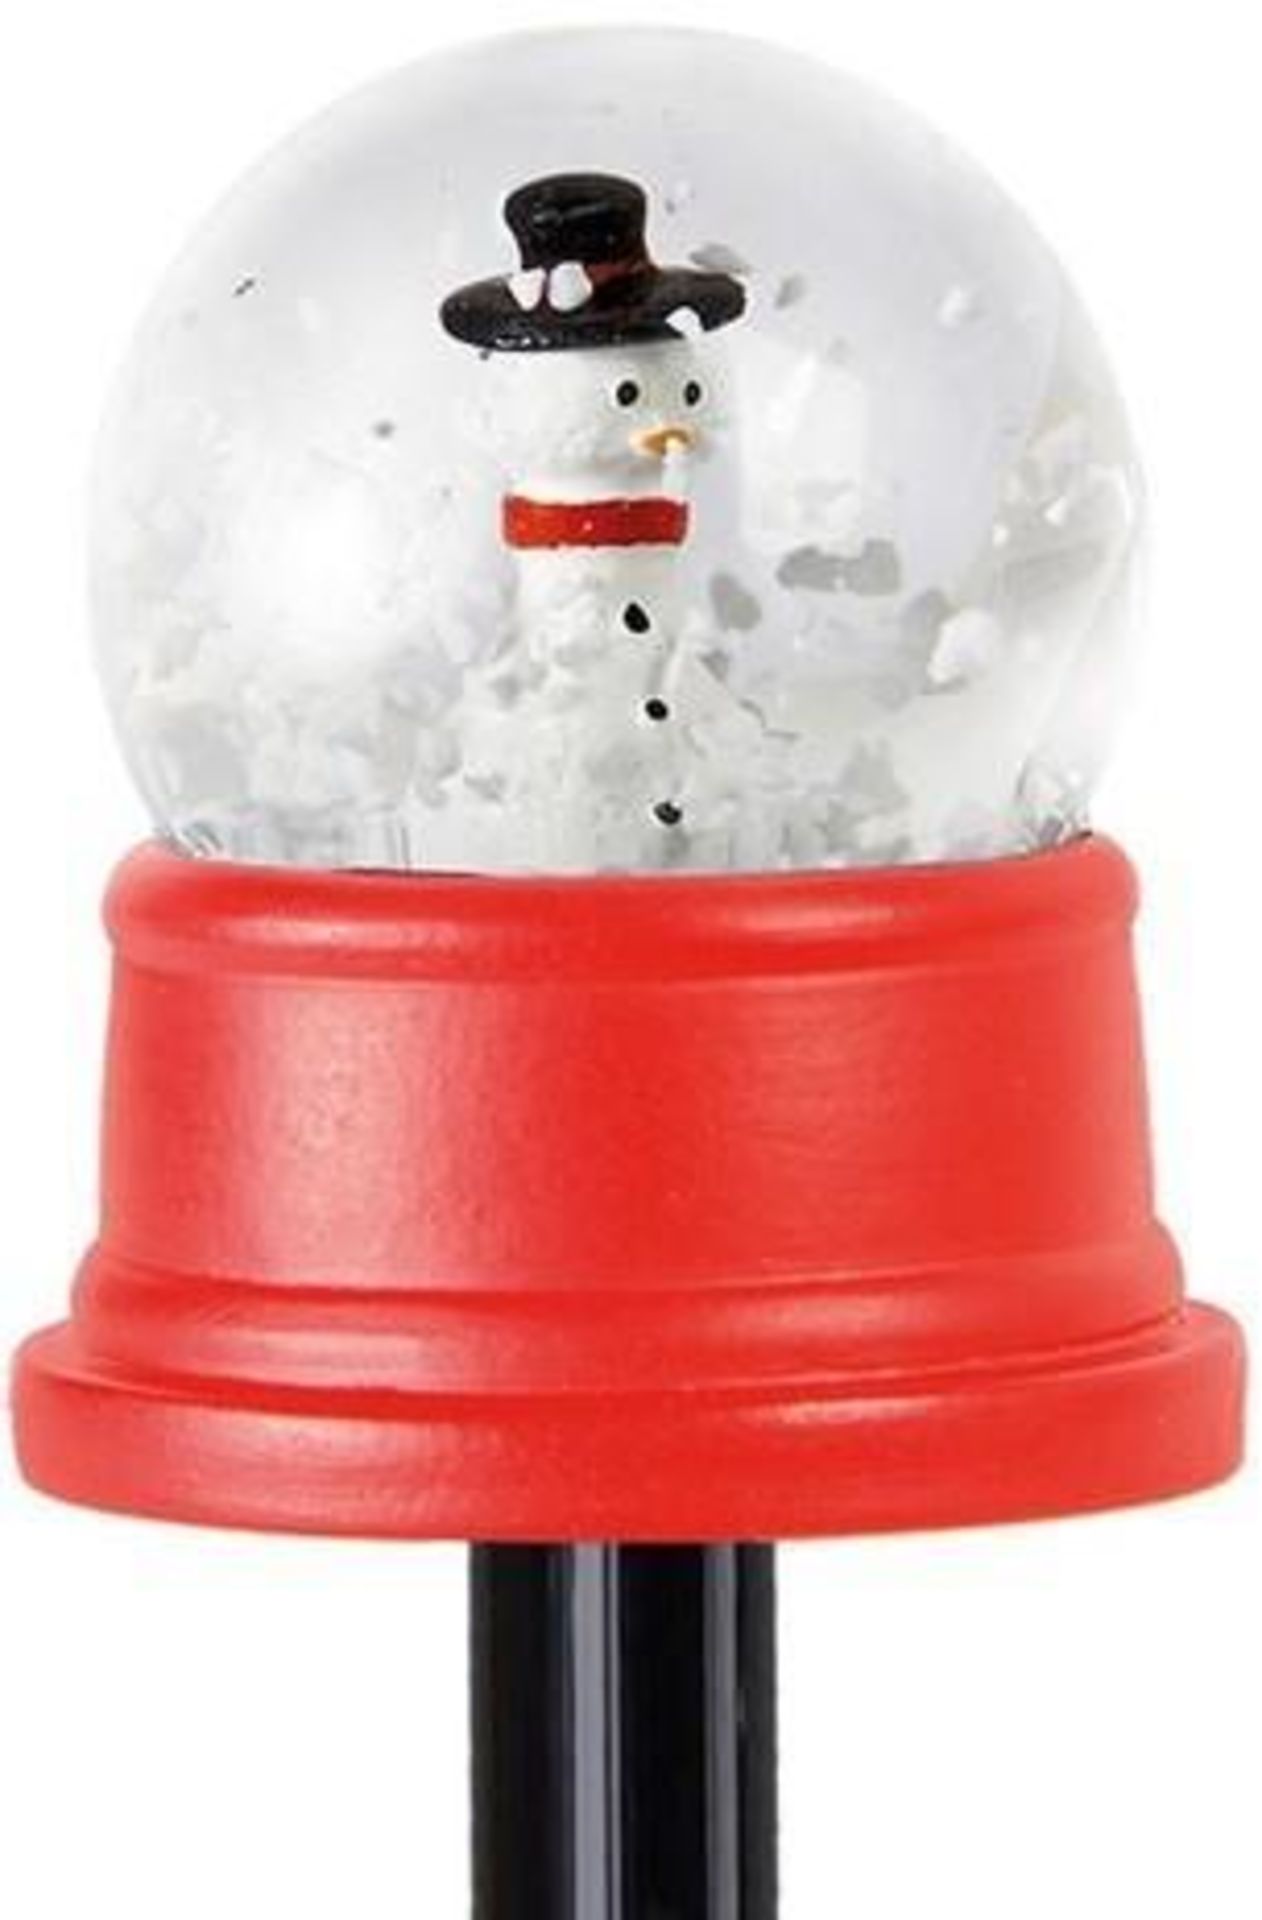 60 x ICE London Christmas Snow Globe Pen - Brand New Stock - Ideal Stocking Fillers - Ref: ICE101001 - Image 3 of 6